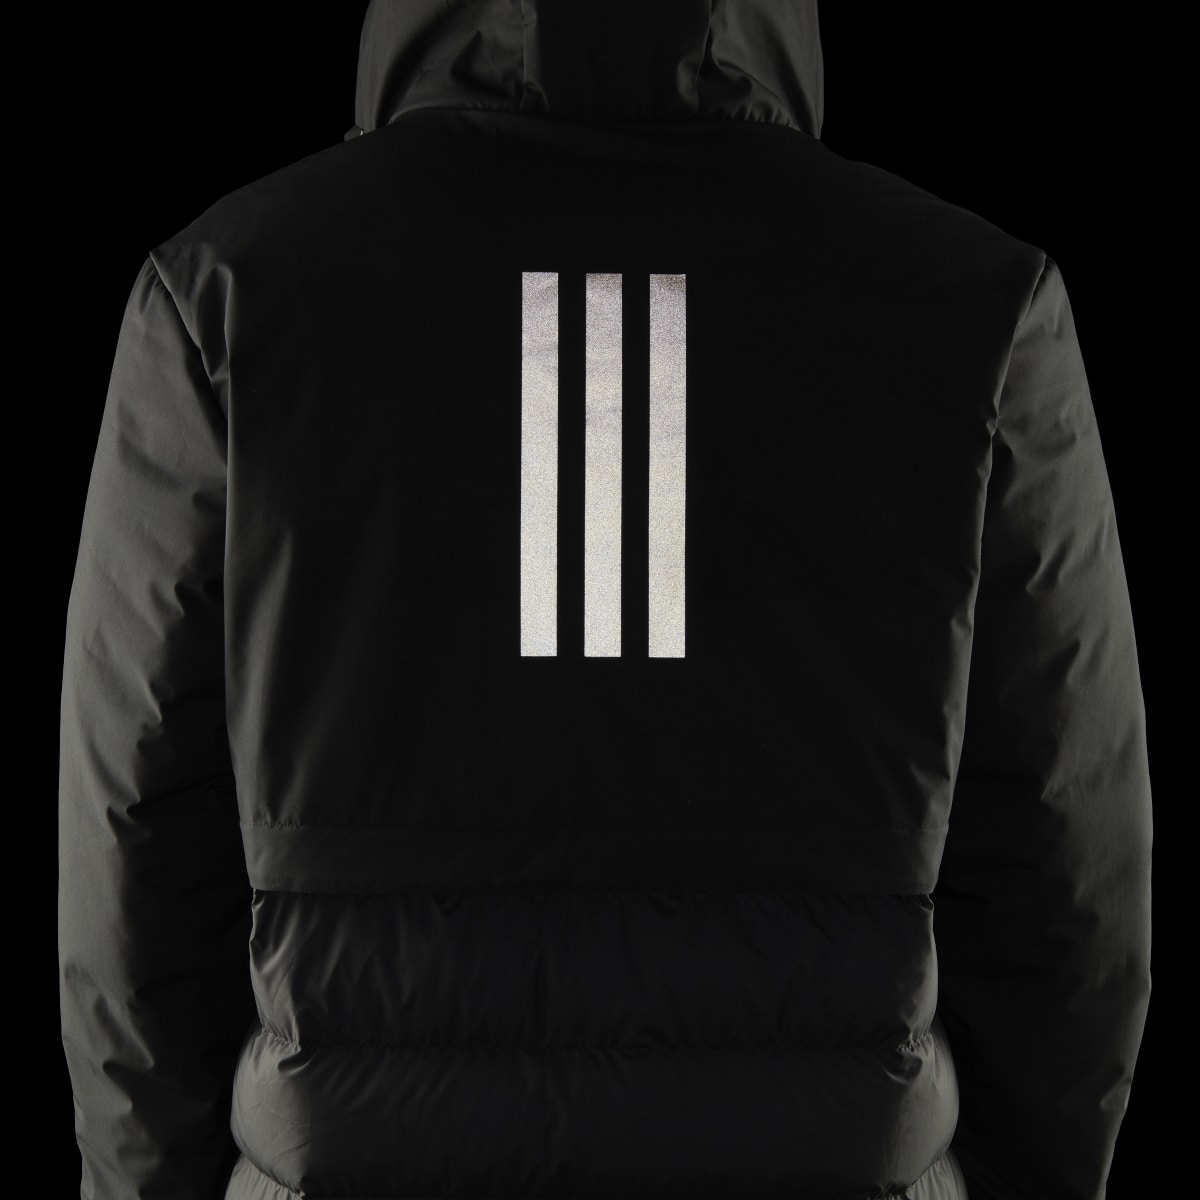 Adidas Traveer COLD.RDY Jacket. 8